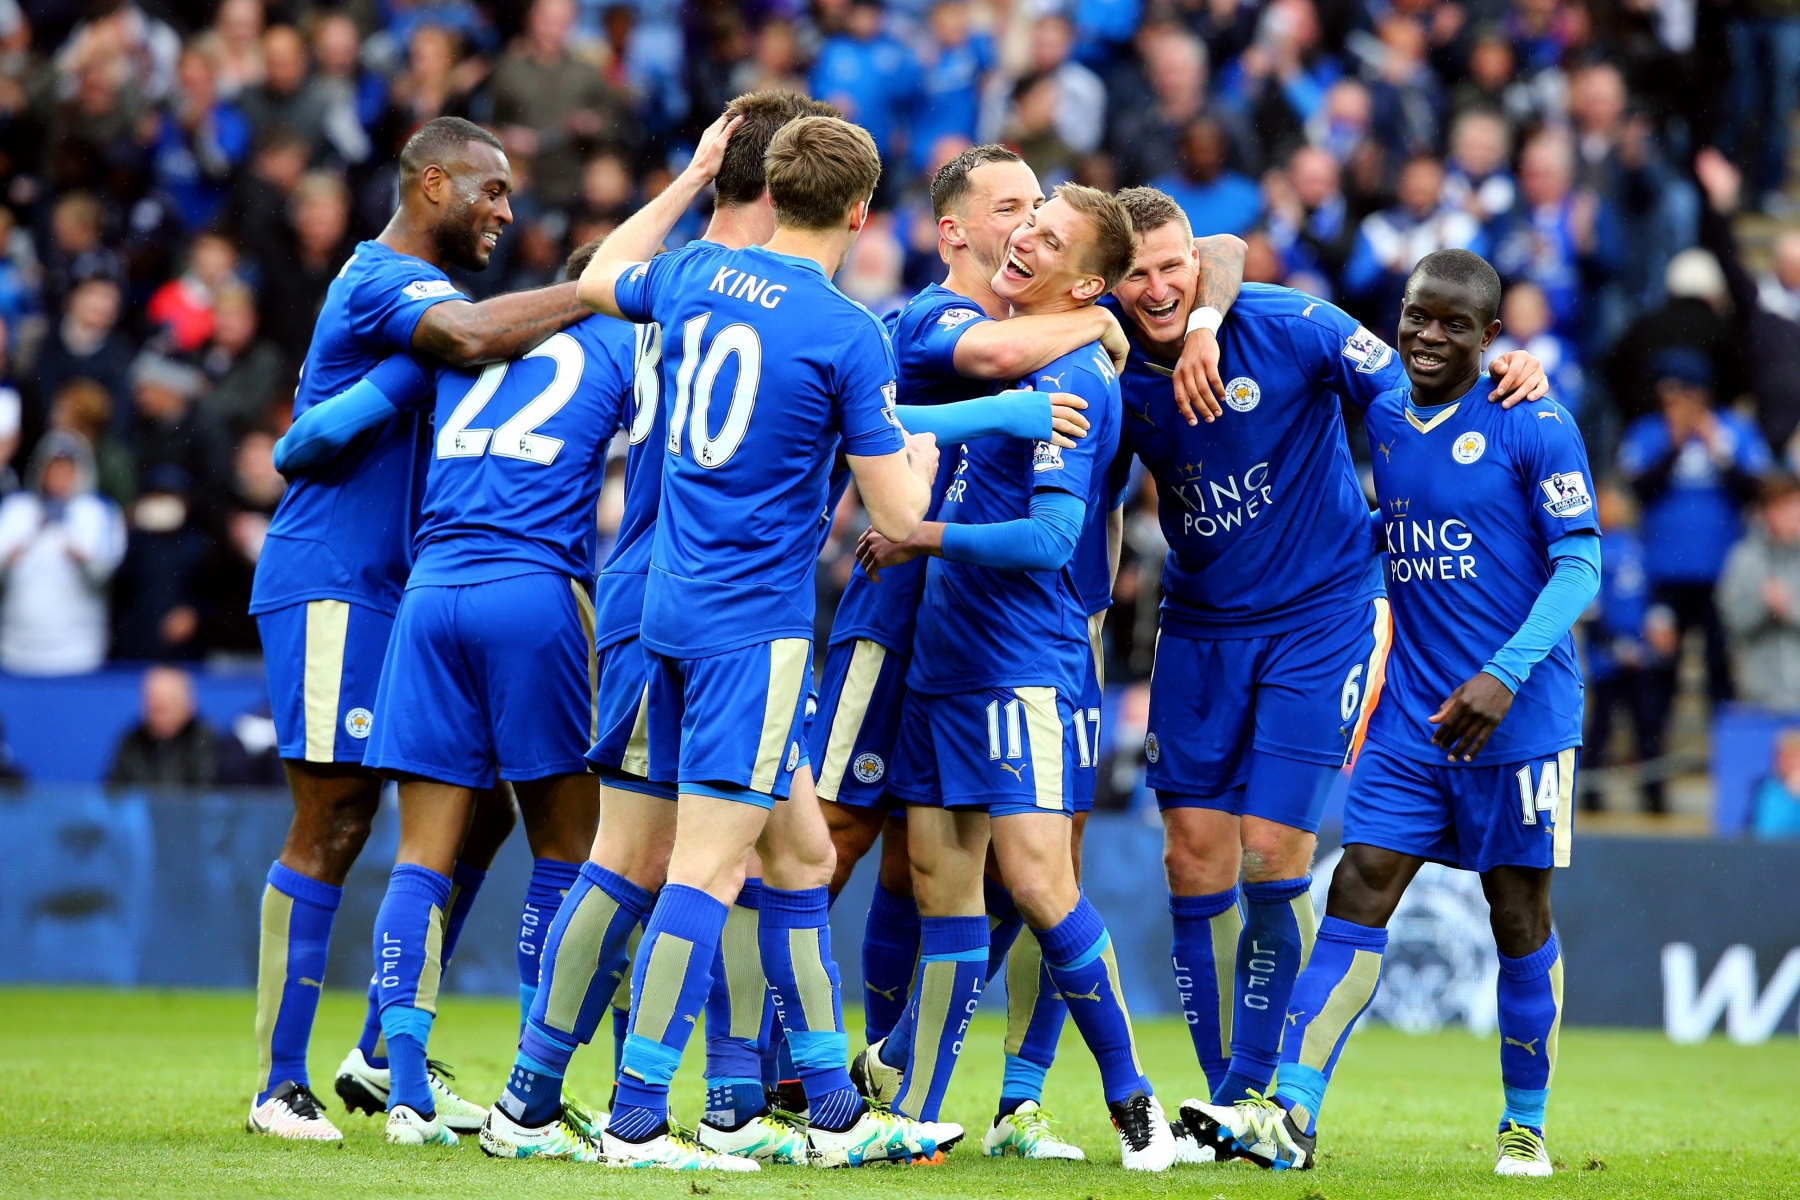 epa05275794 Leicester City's Marc Albrighton (centre) celebrates making it 4-0 during the English Premier League soccer match between Leicester City and Swansea City at The King Power Stadium in Leicester, Britain, 24 April 2016.  EPA/TIM KEETON EDITORIAL USE ONLY. No use with unauthorized audio, video, data, fixture lists, club/league logos or 'live' services. Online in-match use limited to 75 images, no video emulation. No use in betting, games or single club/league/player publications.leicester GROSSBRITANNIEN FUSSBALL LEICESTER SWANSEA